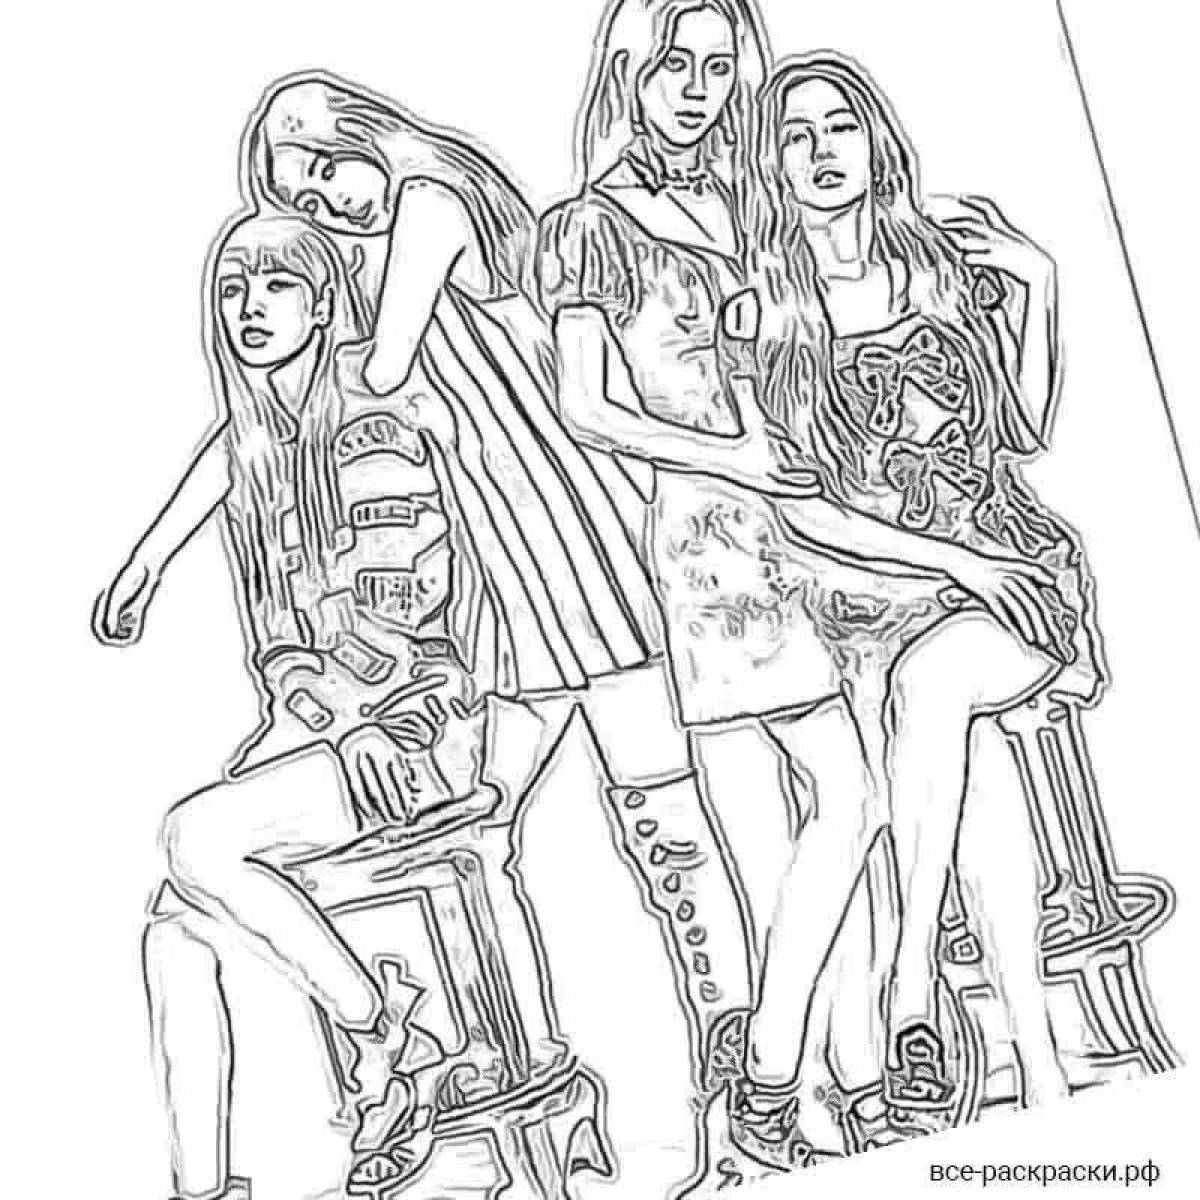 Black fever coloring page